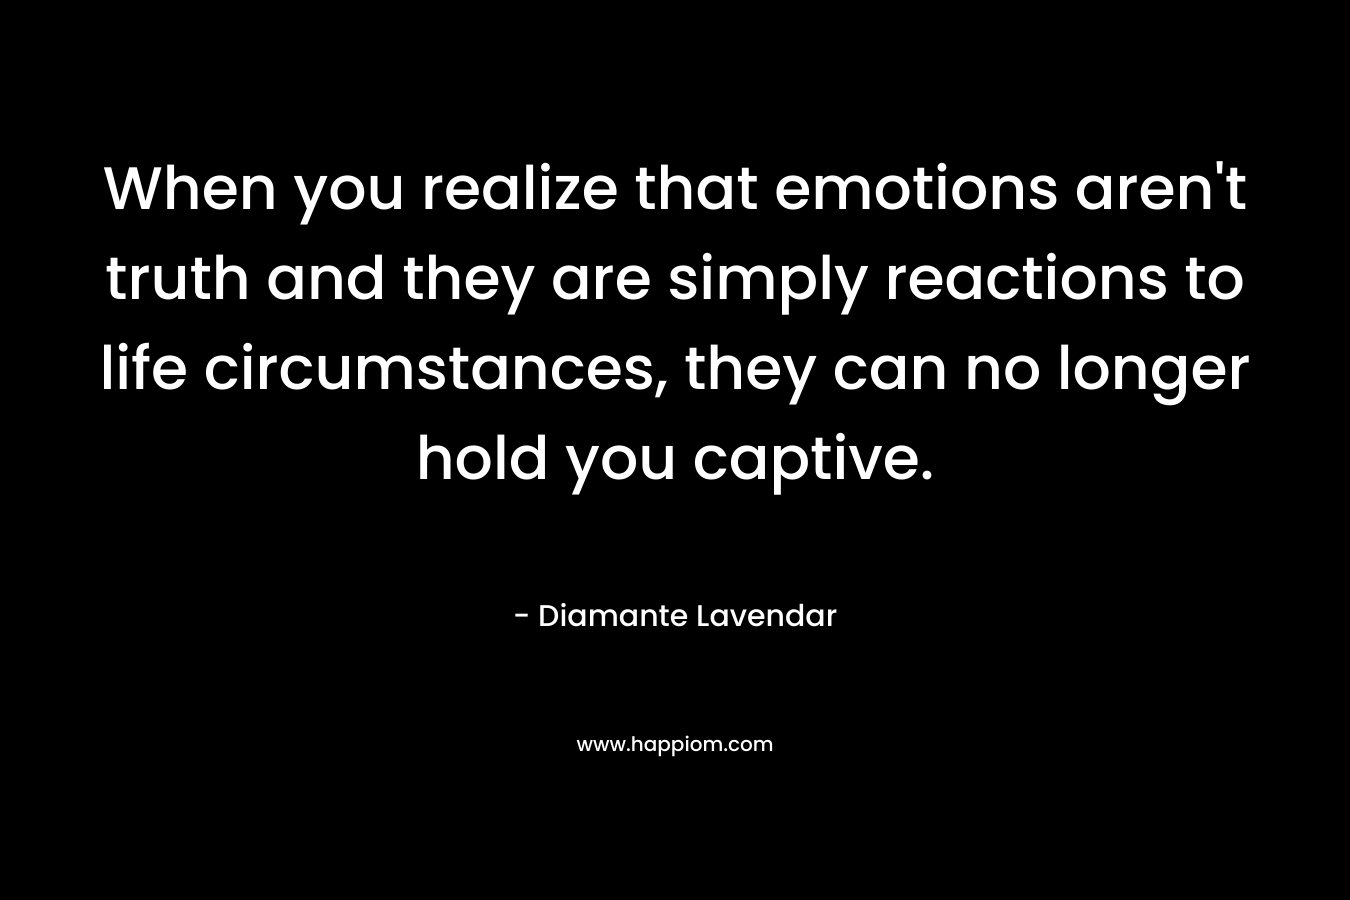 When you realize that emotions aren’t truth and they are simply reactions to life circumstances, they can no longer hold you captive. – Diamante Lavendar